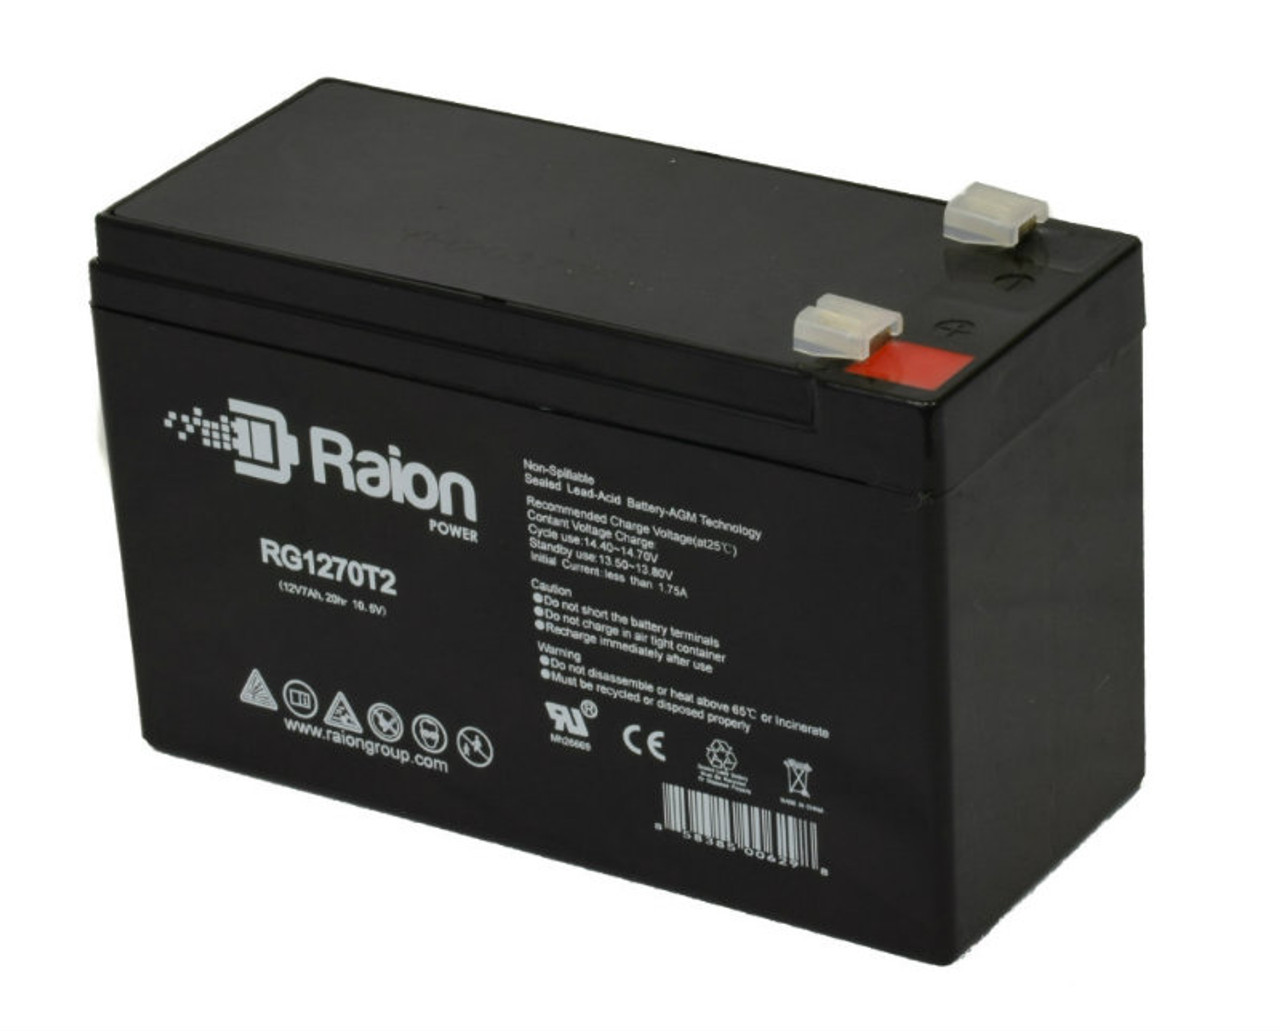 Raion Power RG1270T1 12V 7Ah Non-Spillable Replacement Battery for RSO SN1200